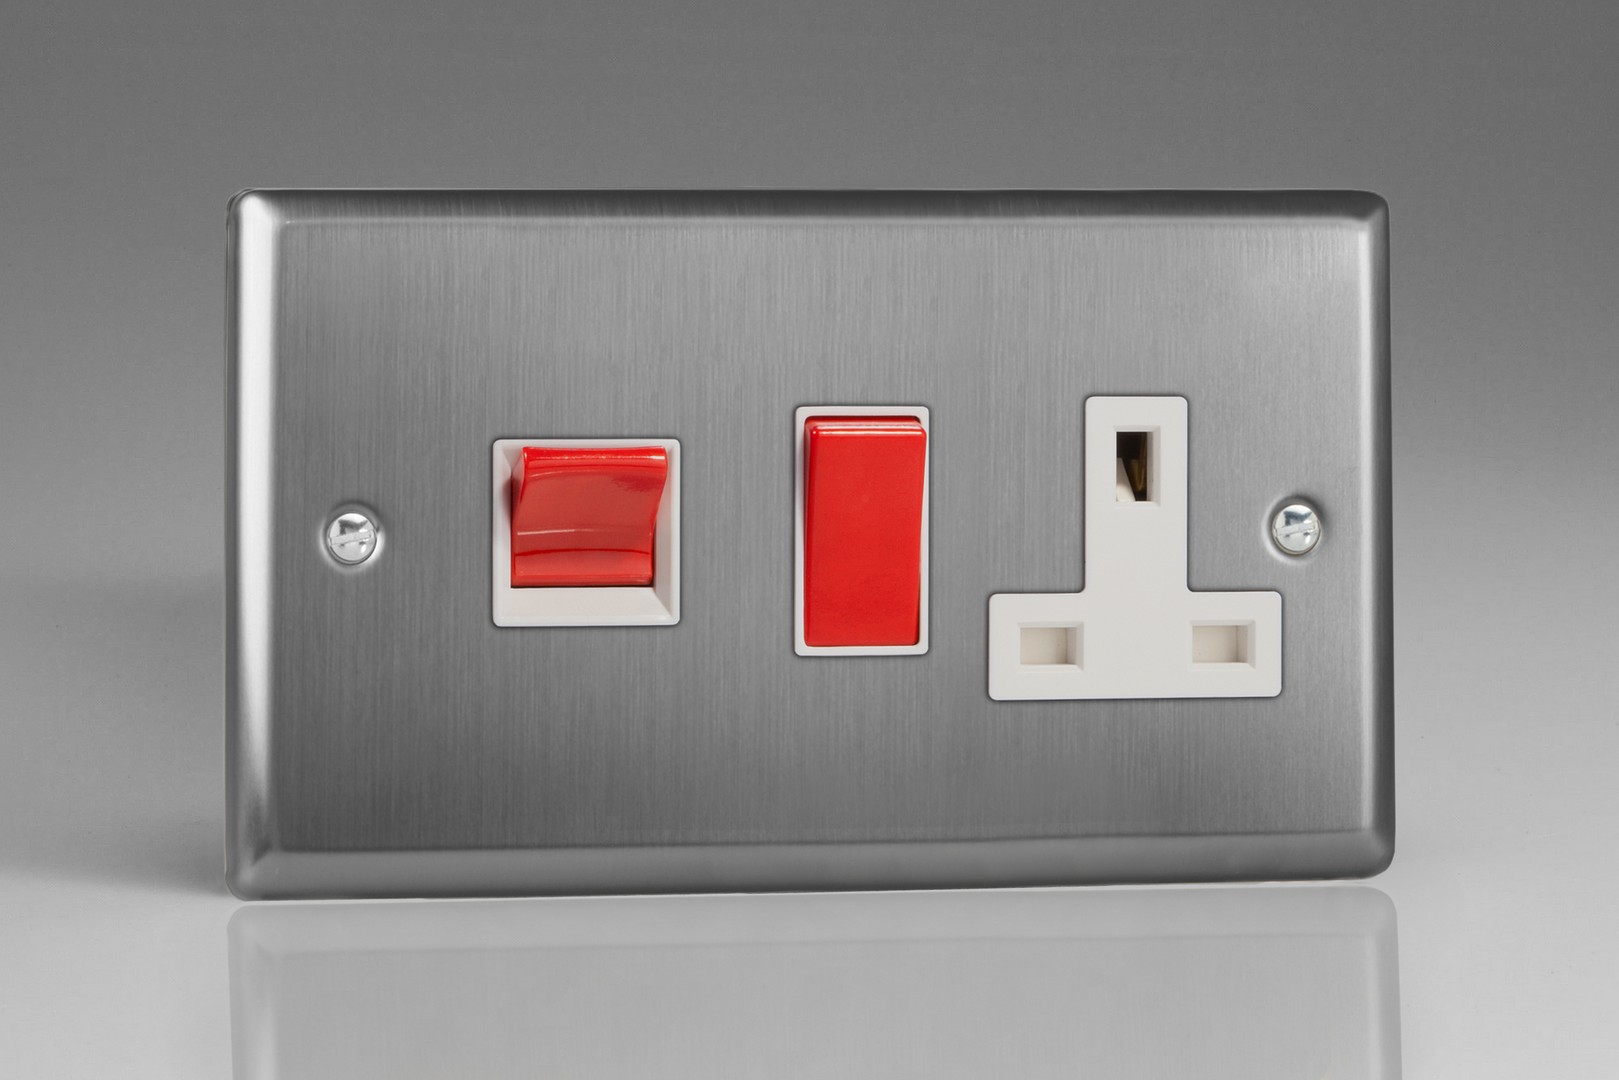 Varilight 45A Cooker Panel with 13A Double Pole Switched Plug Socket Outlet Red 